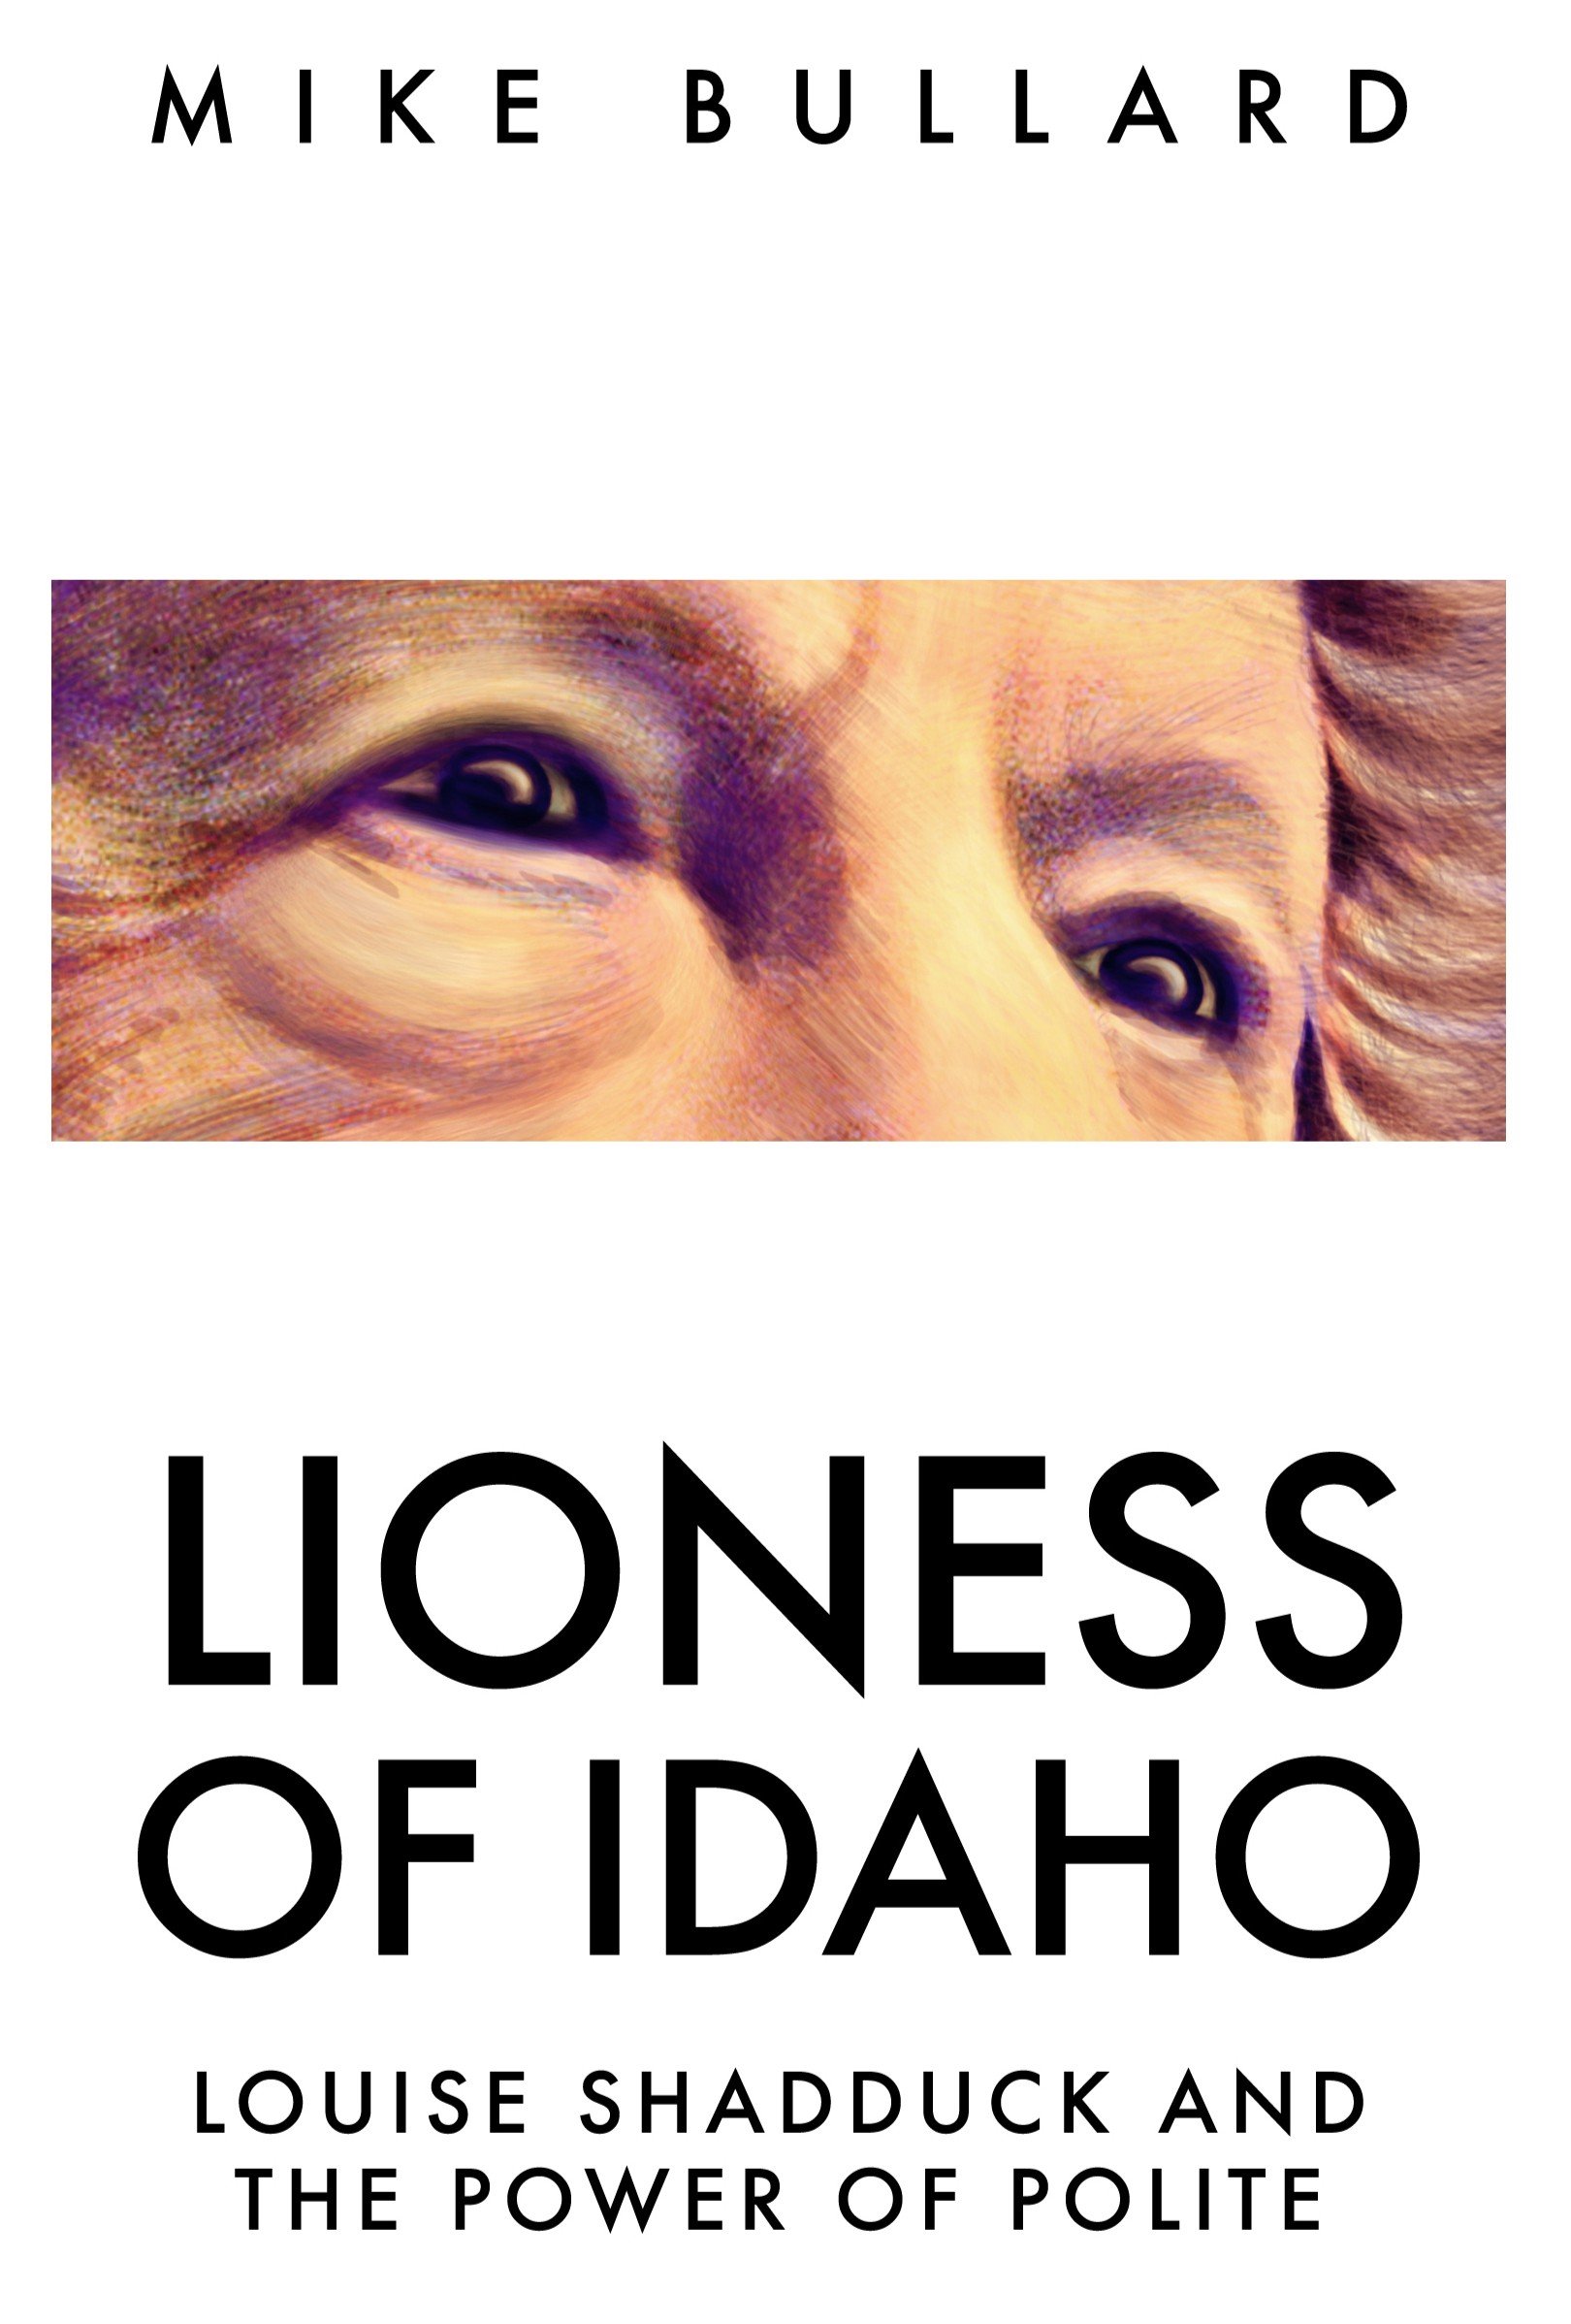 Lioness of Idaho: Louise Shadduck and the power of polite (book cover)